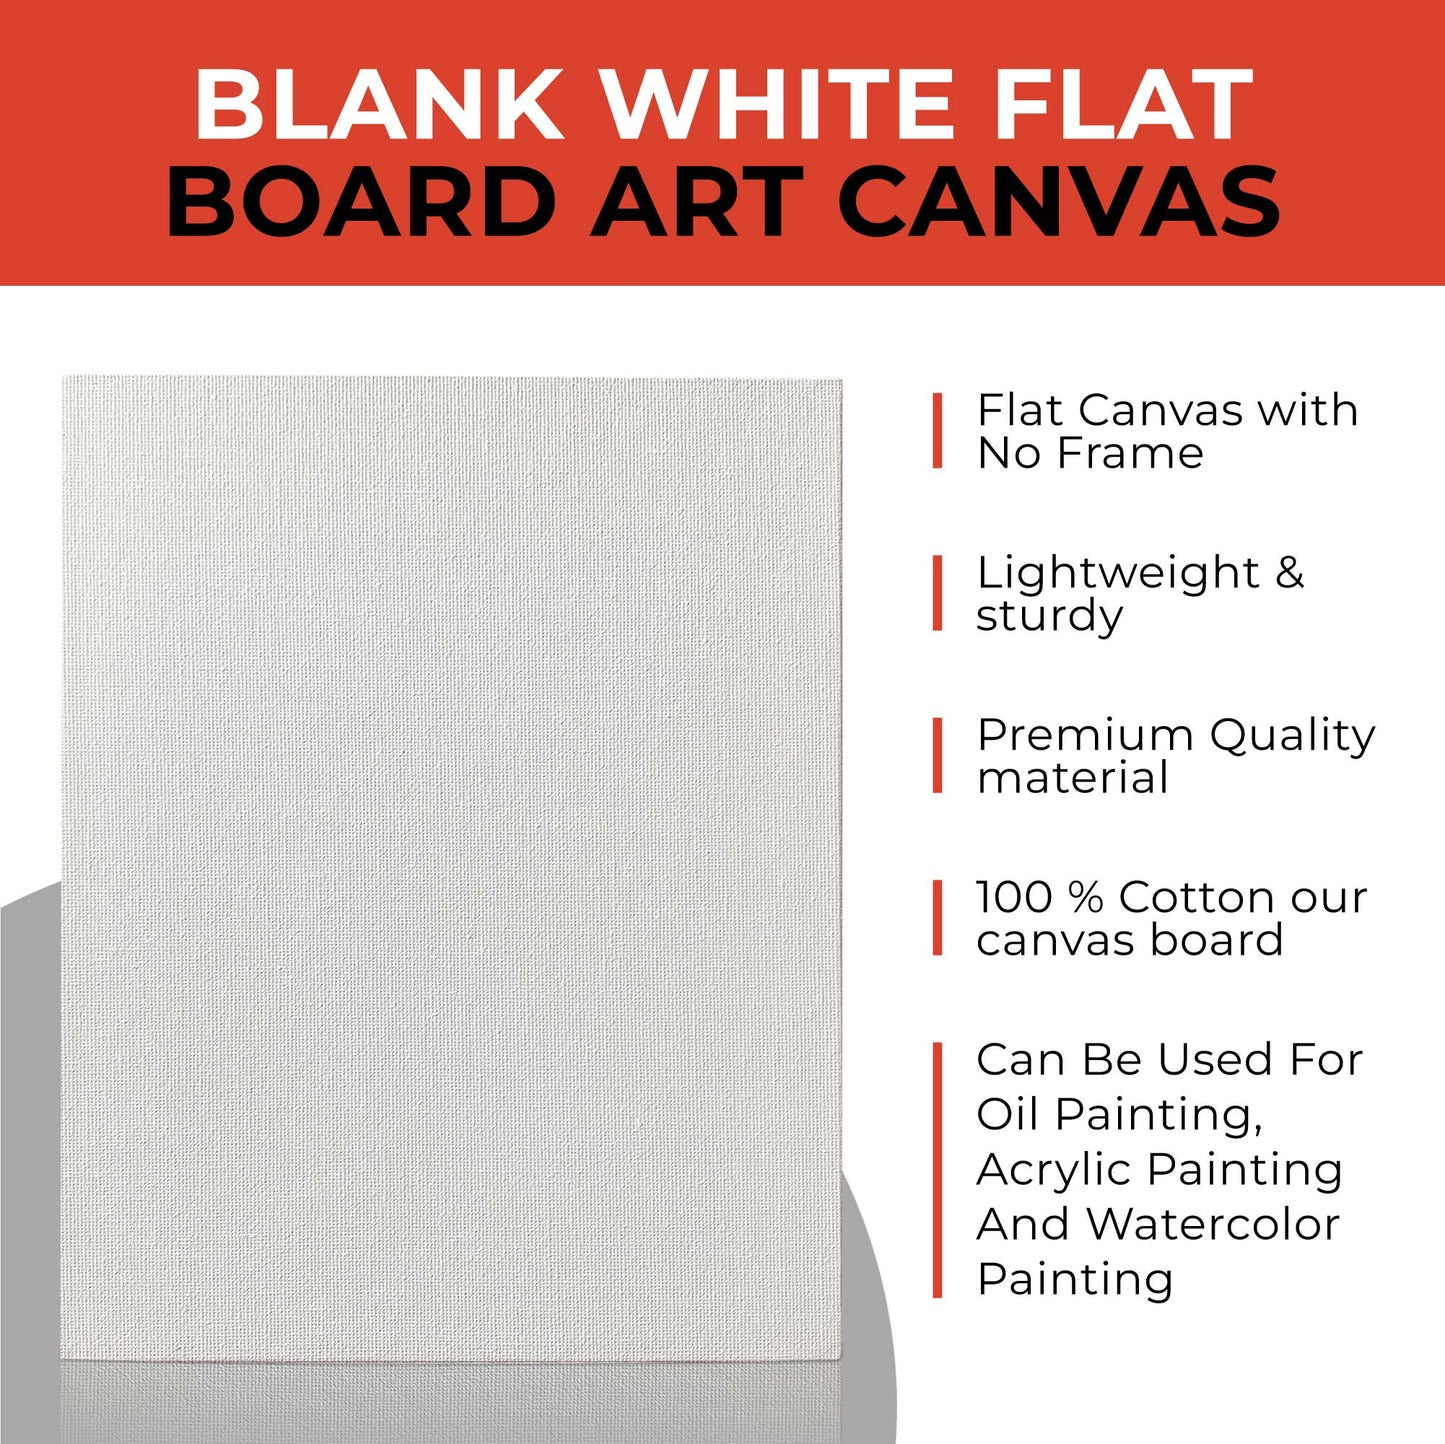 18x24cm Blank White Flat Stretched Board Art Canvas By Janrax